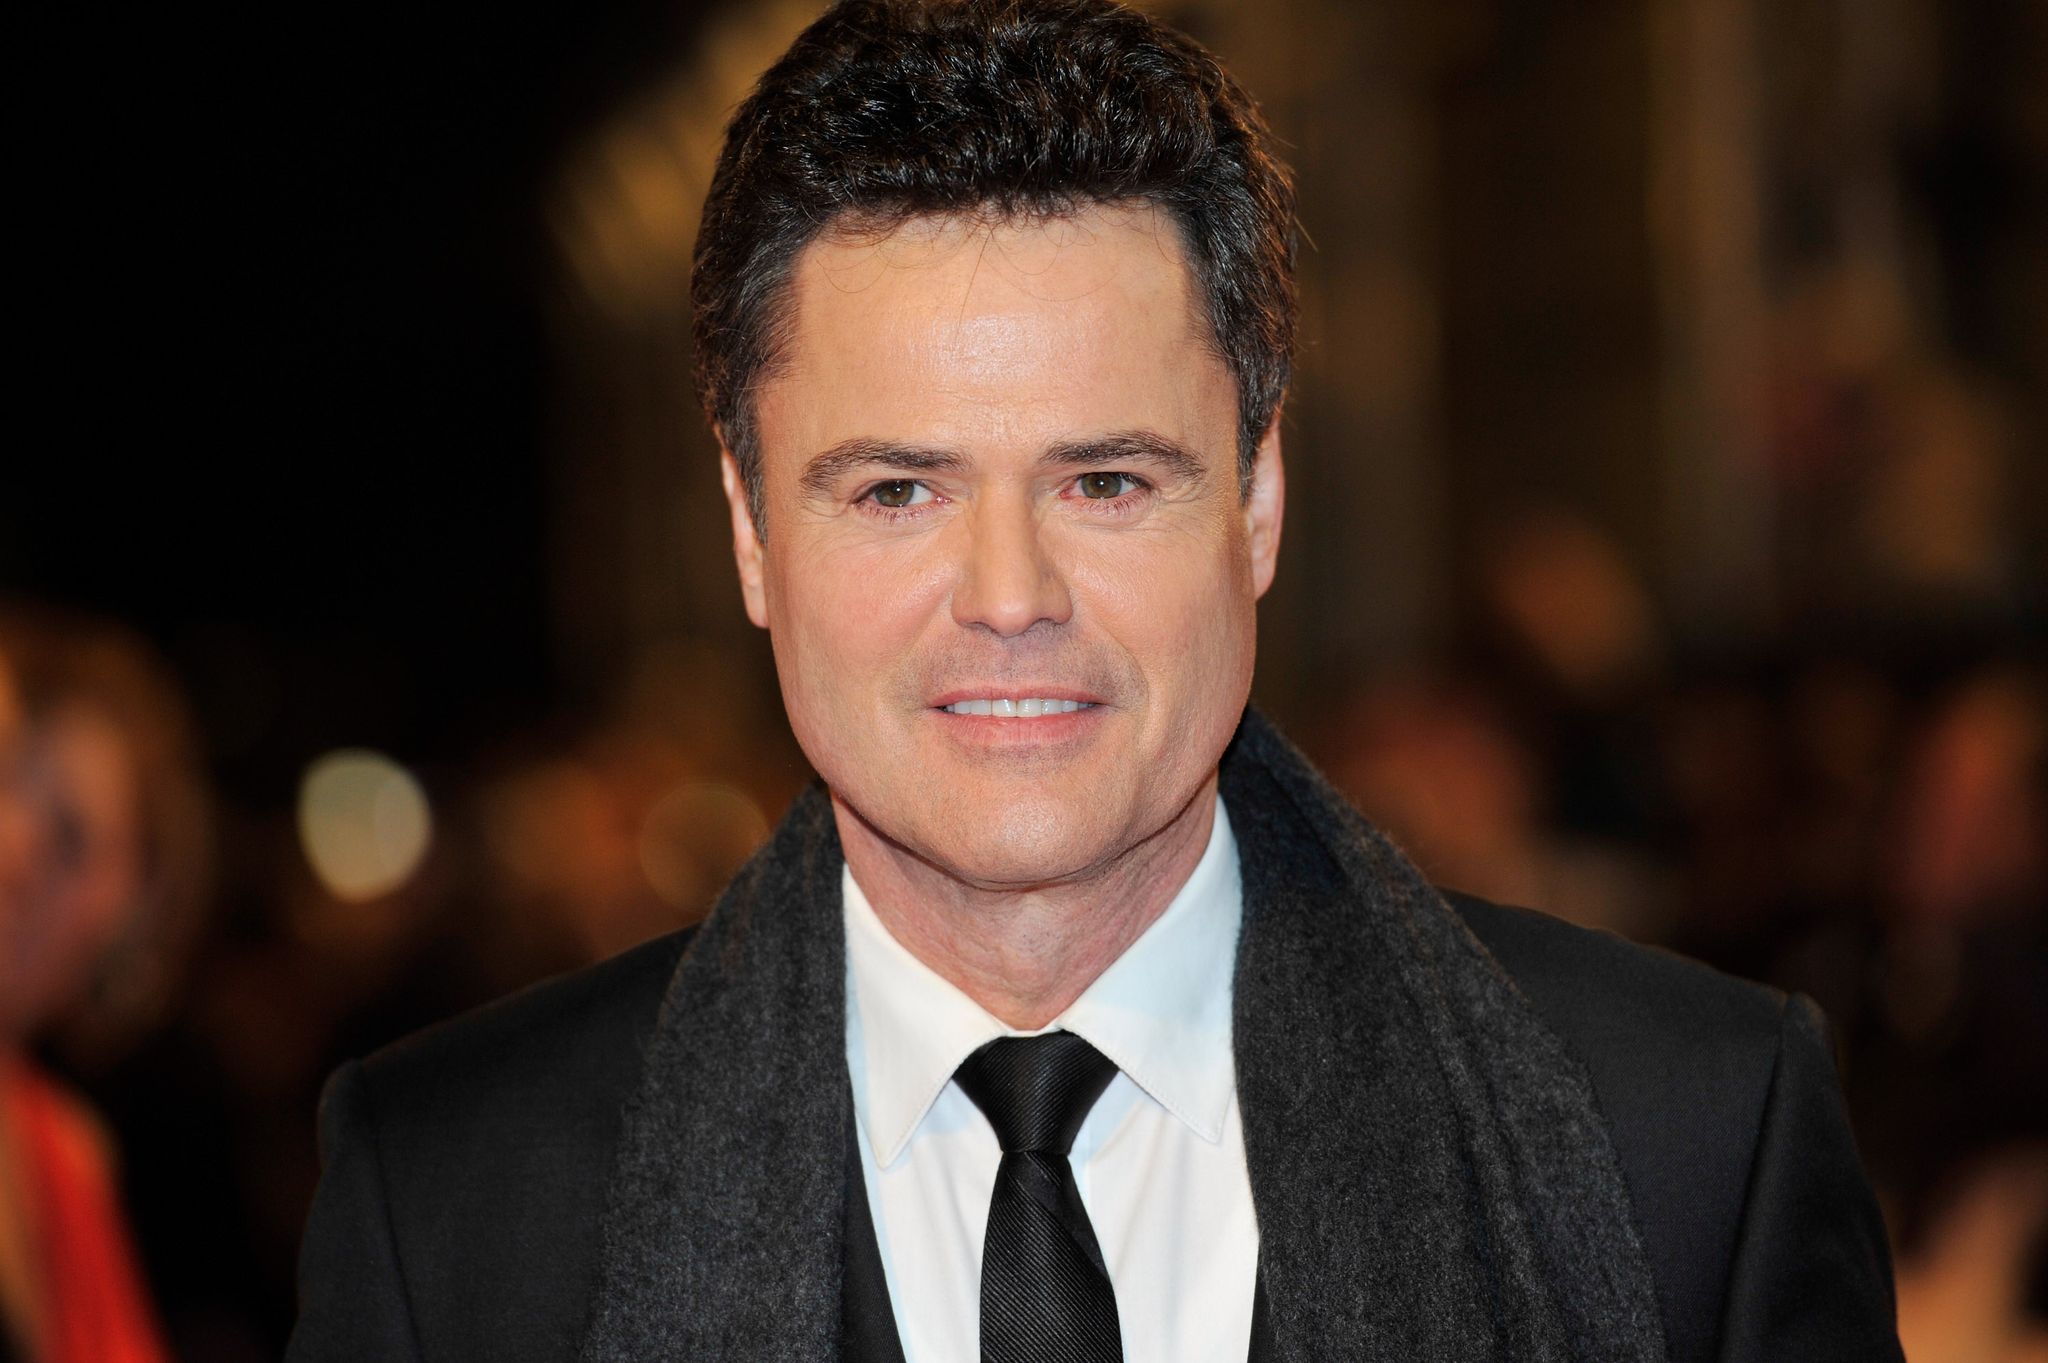 Donny Osmond at the the National Television Awards at 02 Arena on January 23, 2013.  | Photo: Getty Images